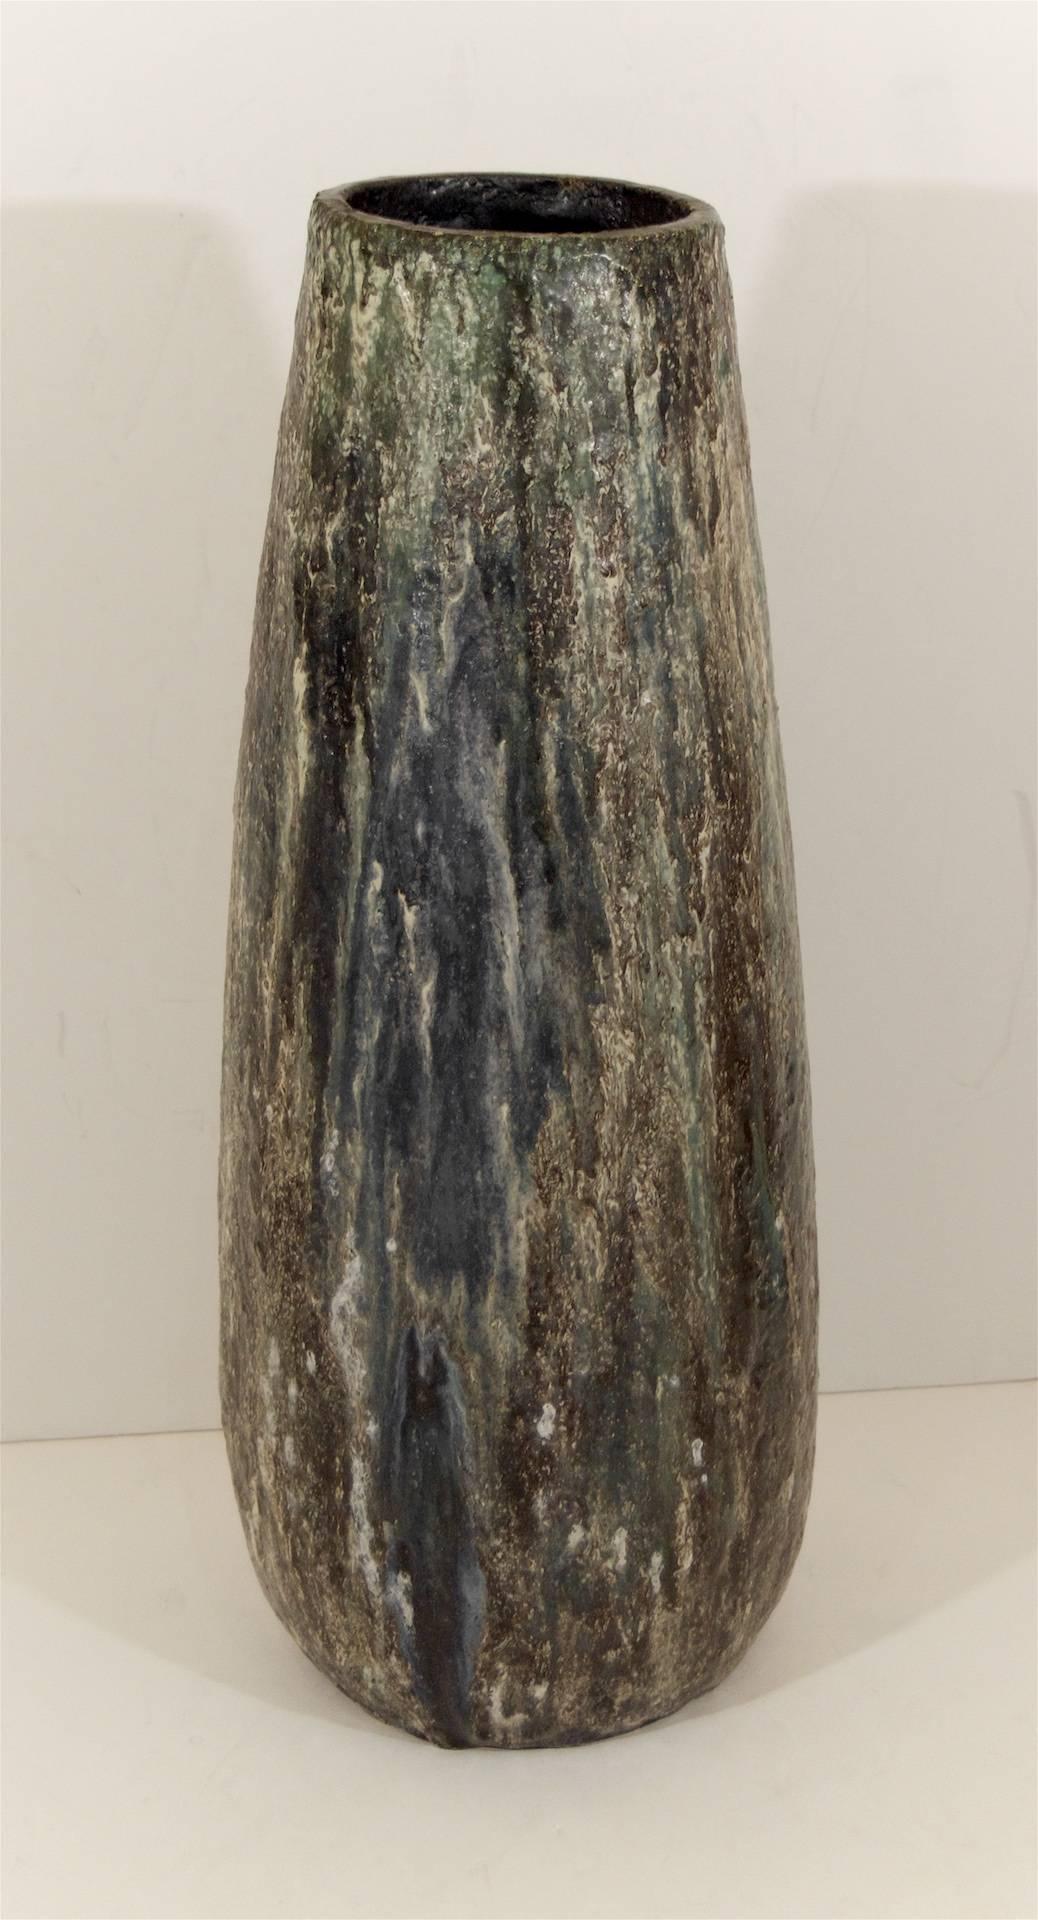 Grand scale lava glaze floor vase. The glazing includes brown, gray, blue and white abstract patterning. Would work well as an umbrella stand.